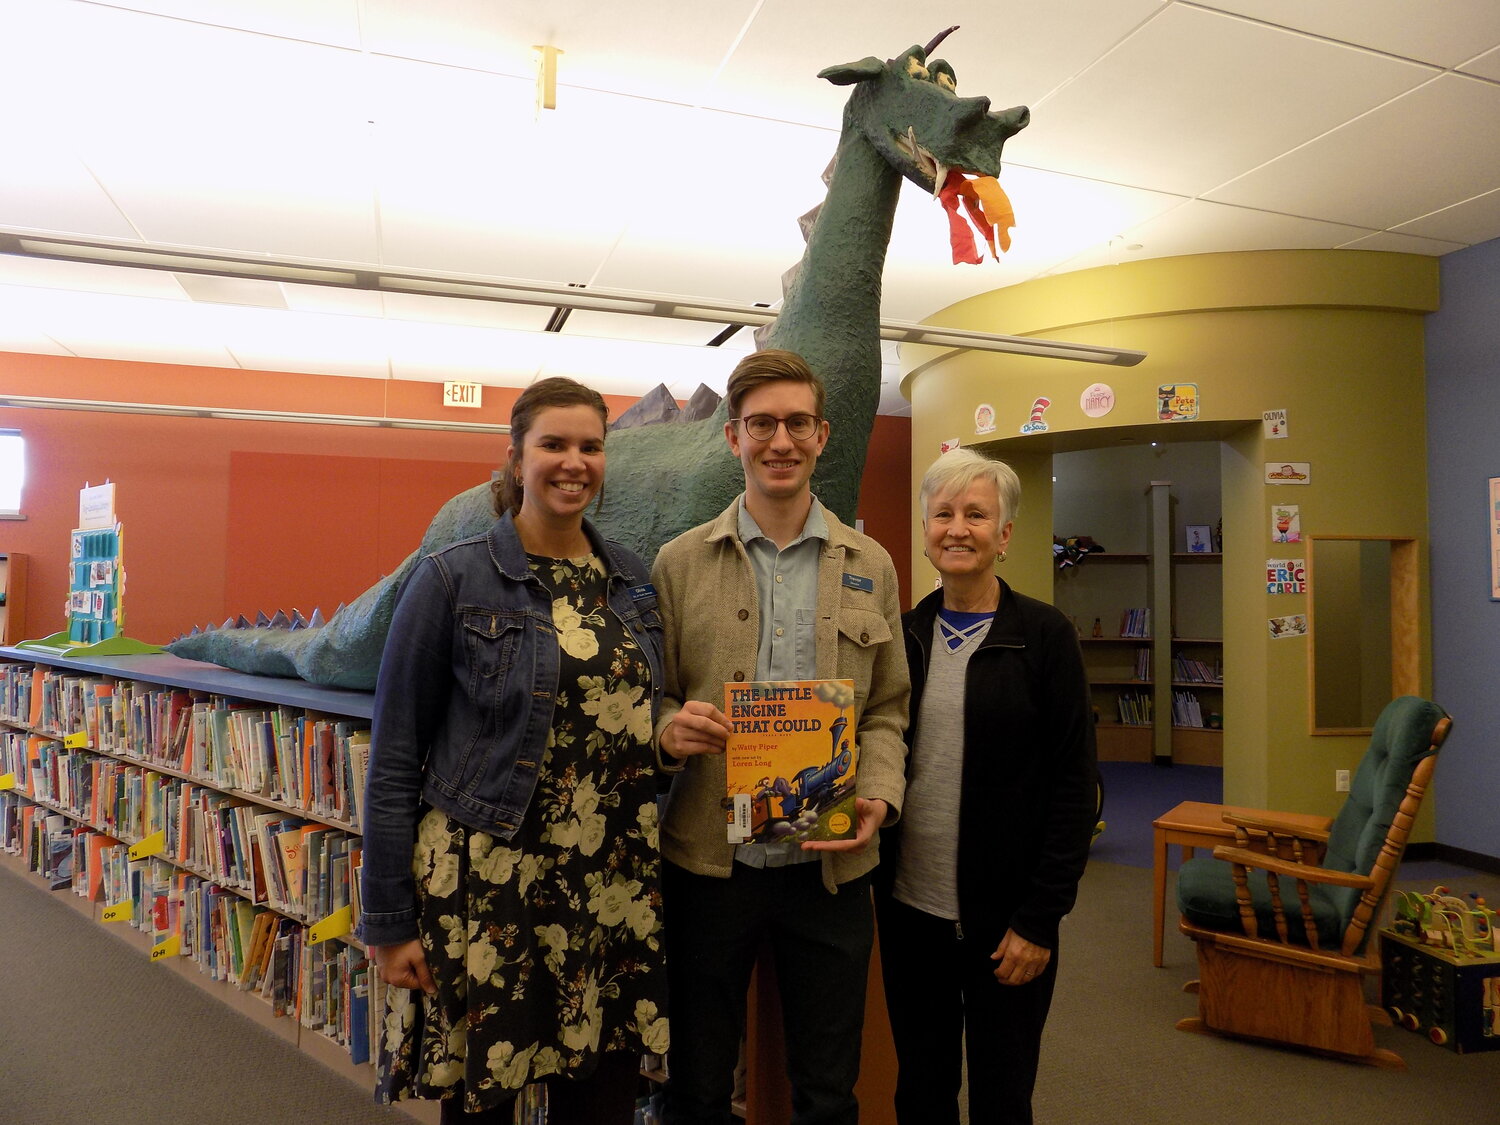 Olivia Kahler (Director of Youth Services), Trevor Sherping (Library Director) and Shirley Harland (KPL Foundation board member) at the Kalona Public Library, holding the first book title children will receive (“The Little Engline That Could”) when they sign up for Dolly Parton’s Imagination Library.